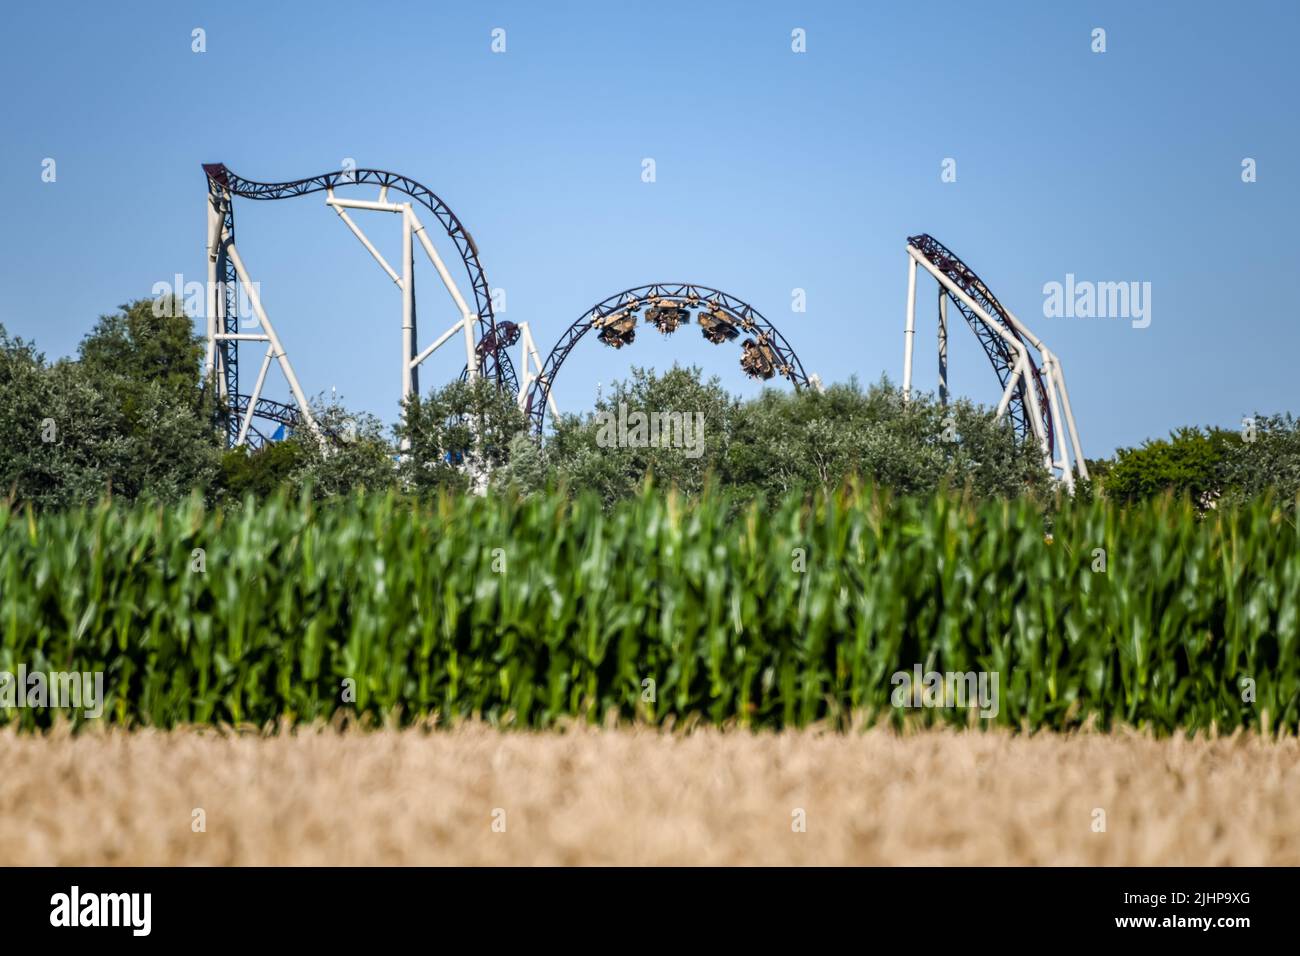 'The Ride To Happiness', a large roller coaster at Plopsaland in Belgium. Stock Photo